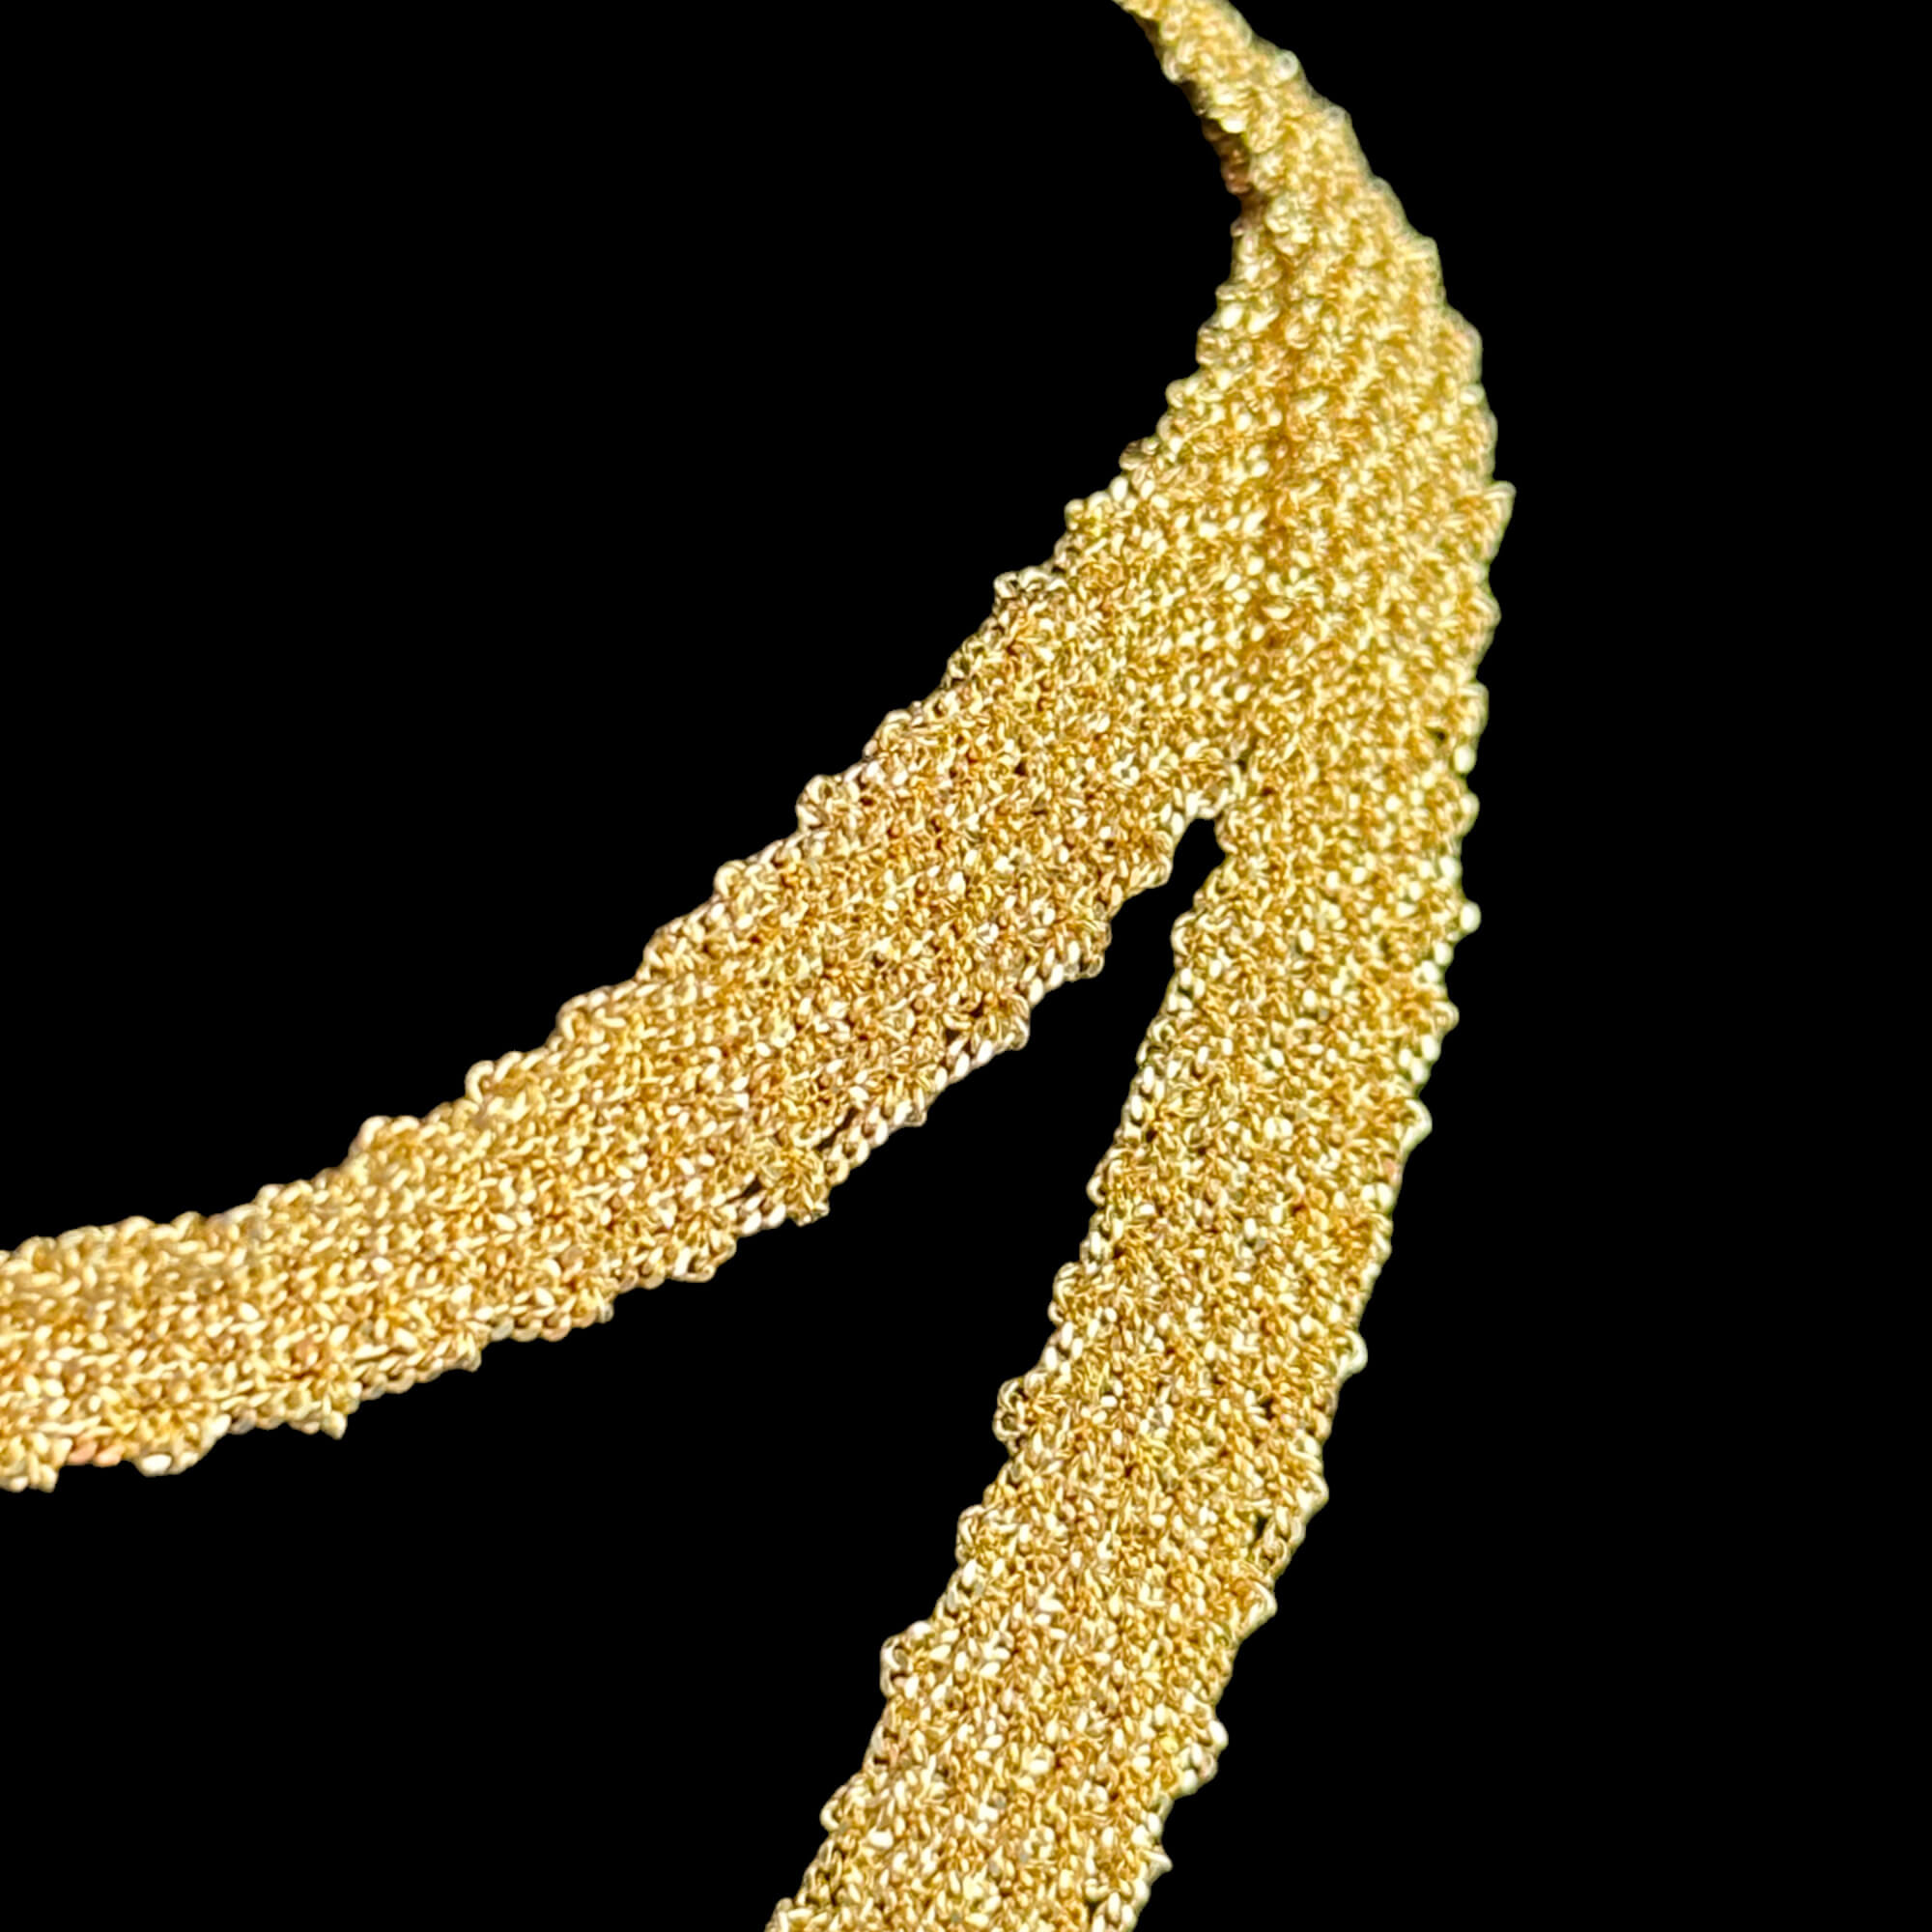 Gilded scarf or interwoven chains